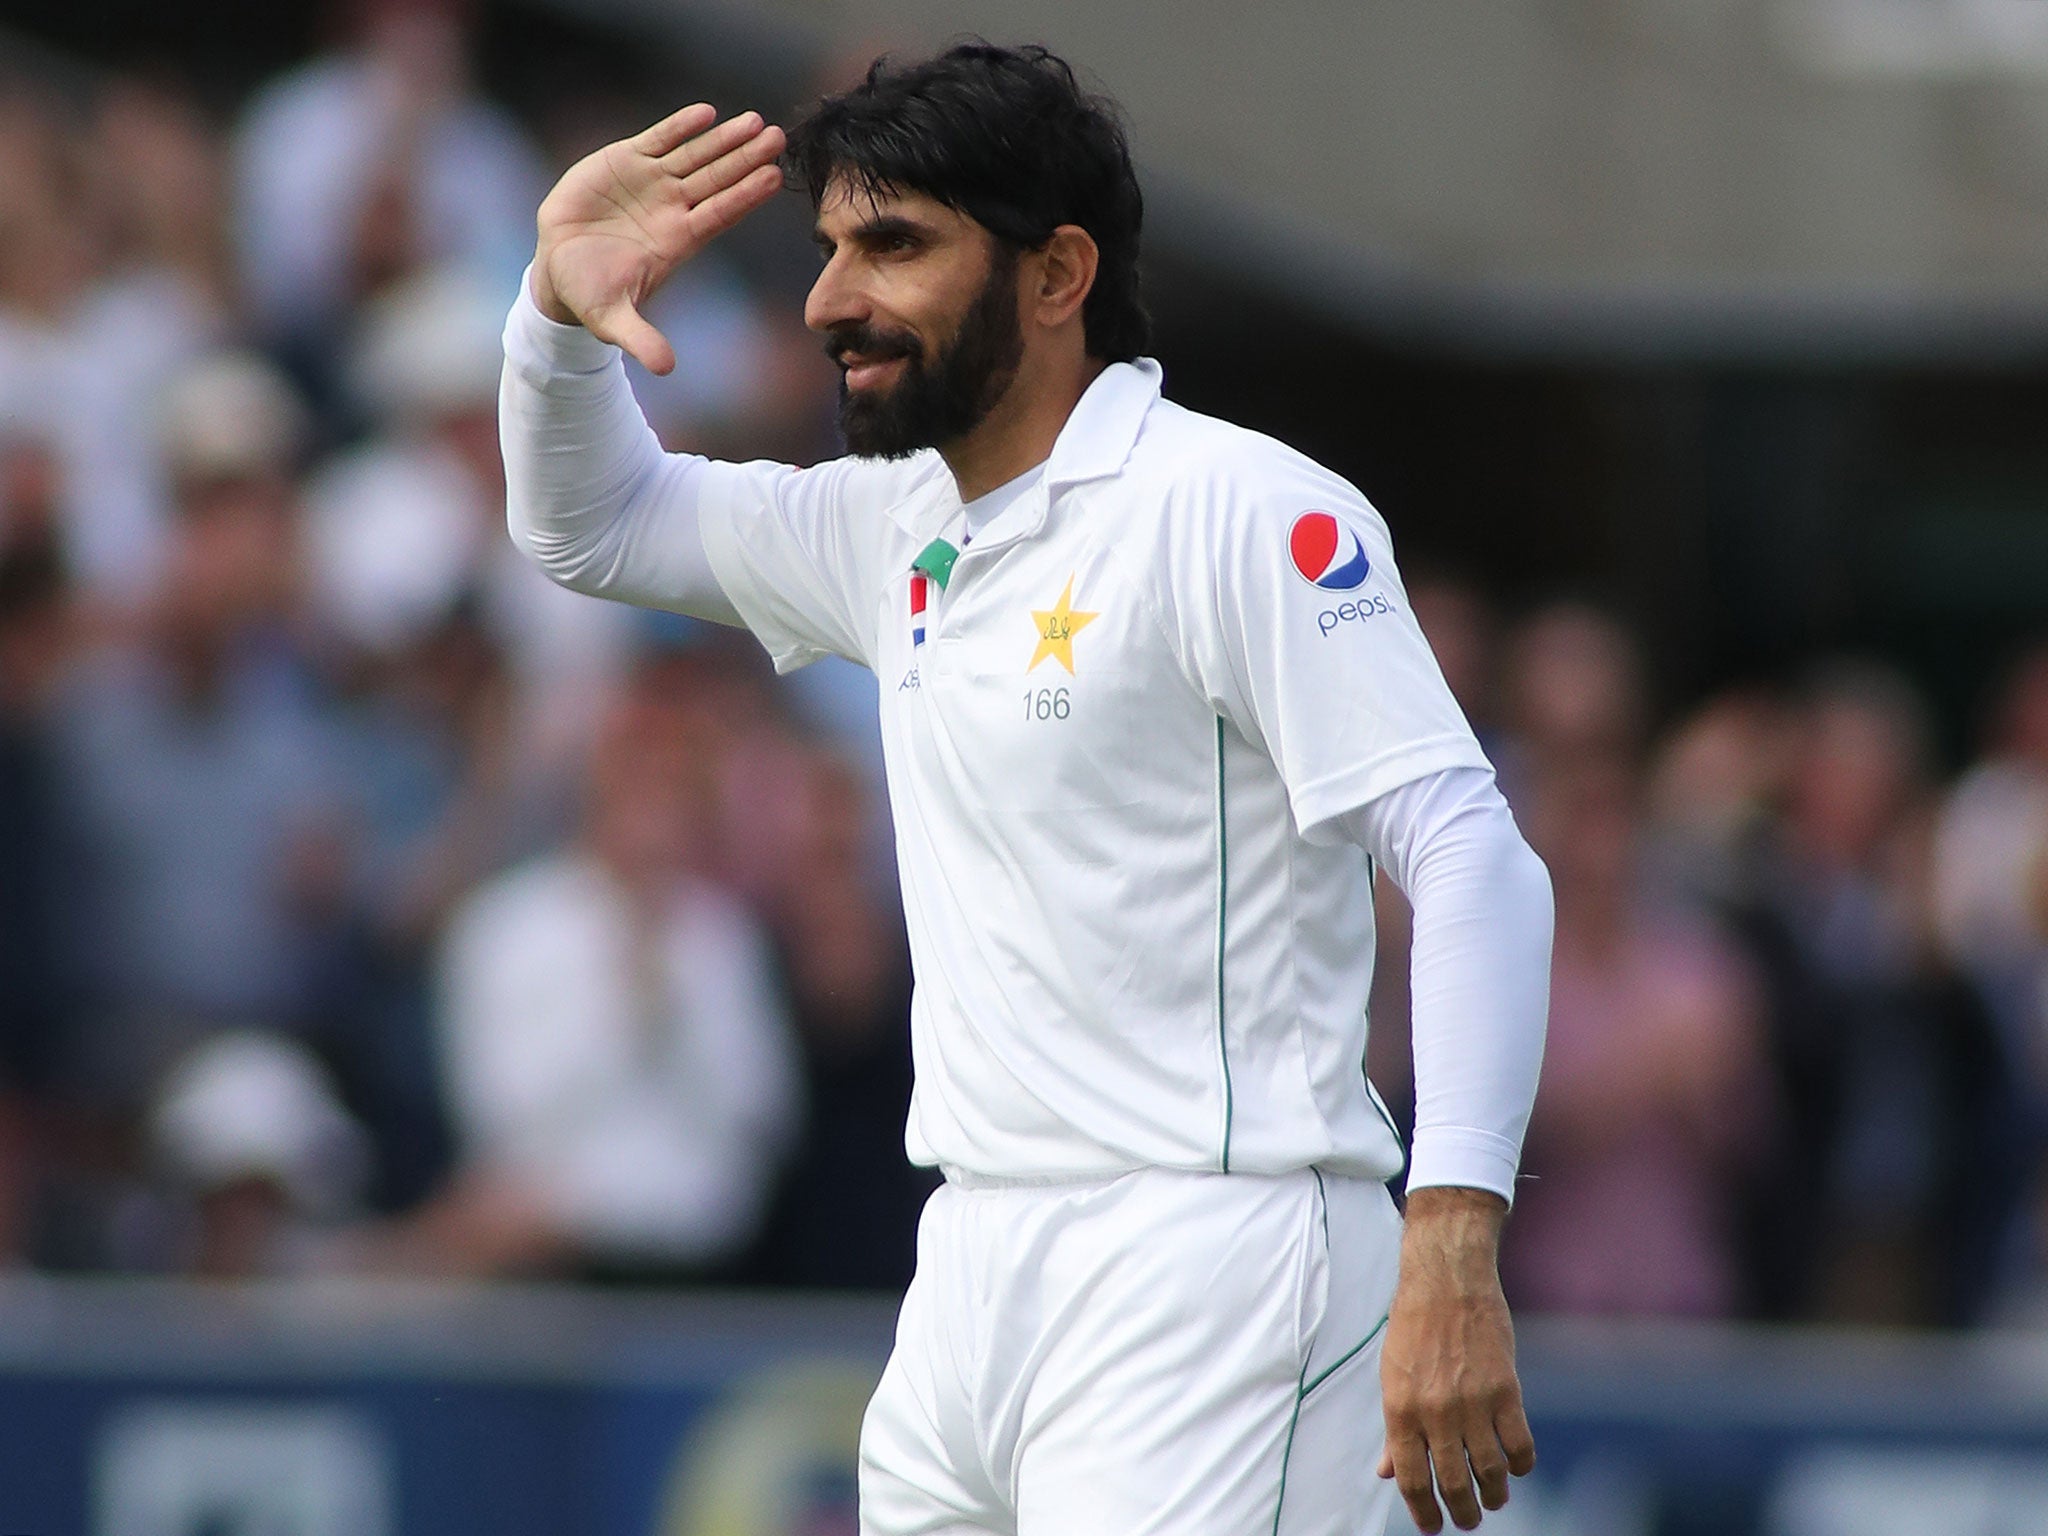 Misbah-ul-Haq salutes the Pakistan flag after reaching 100